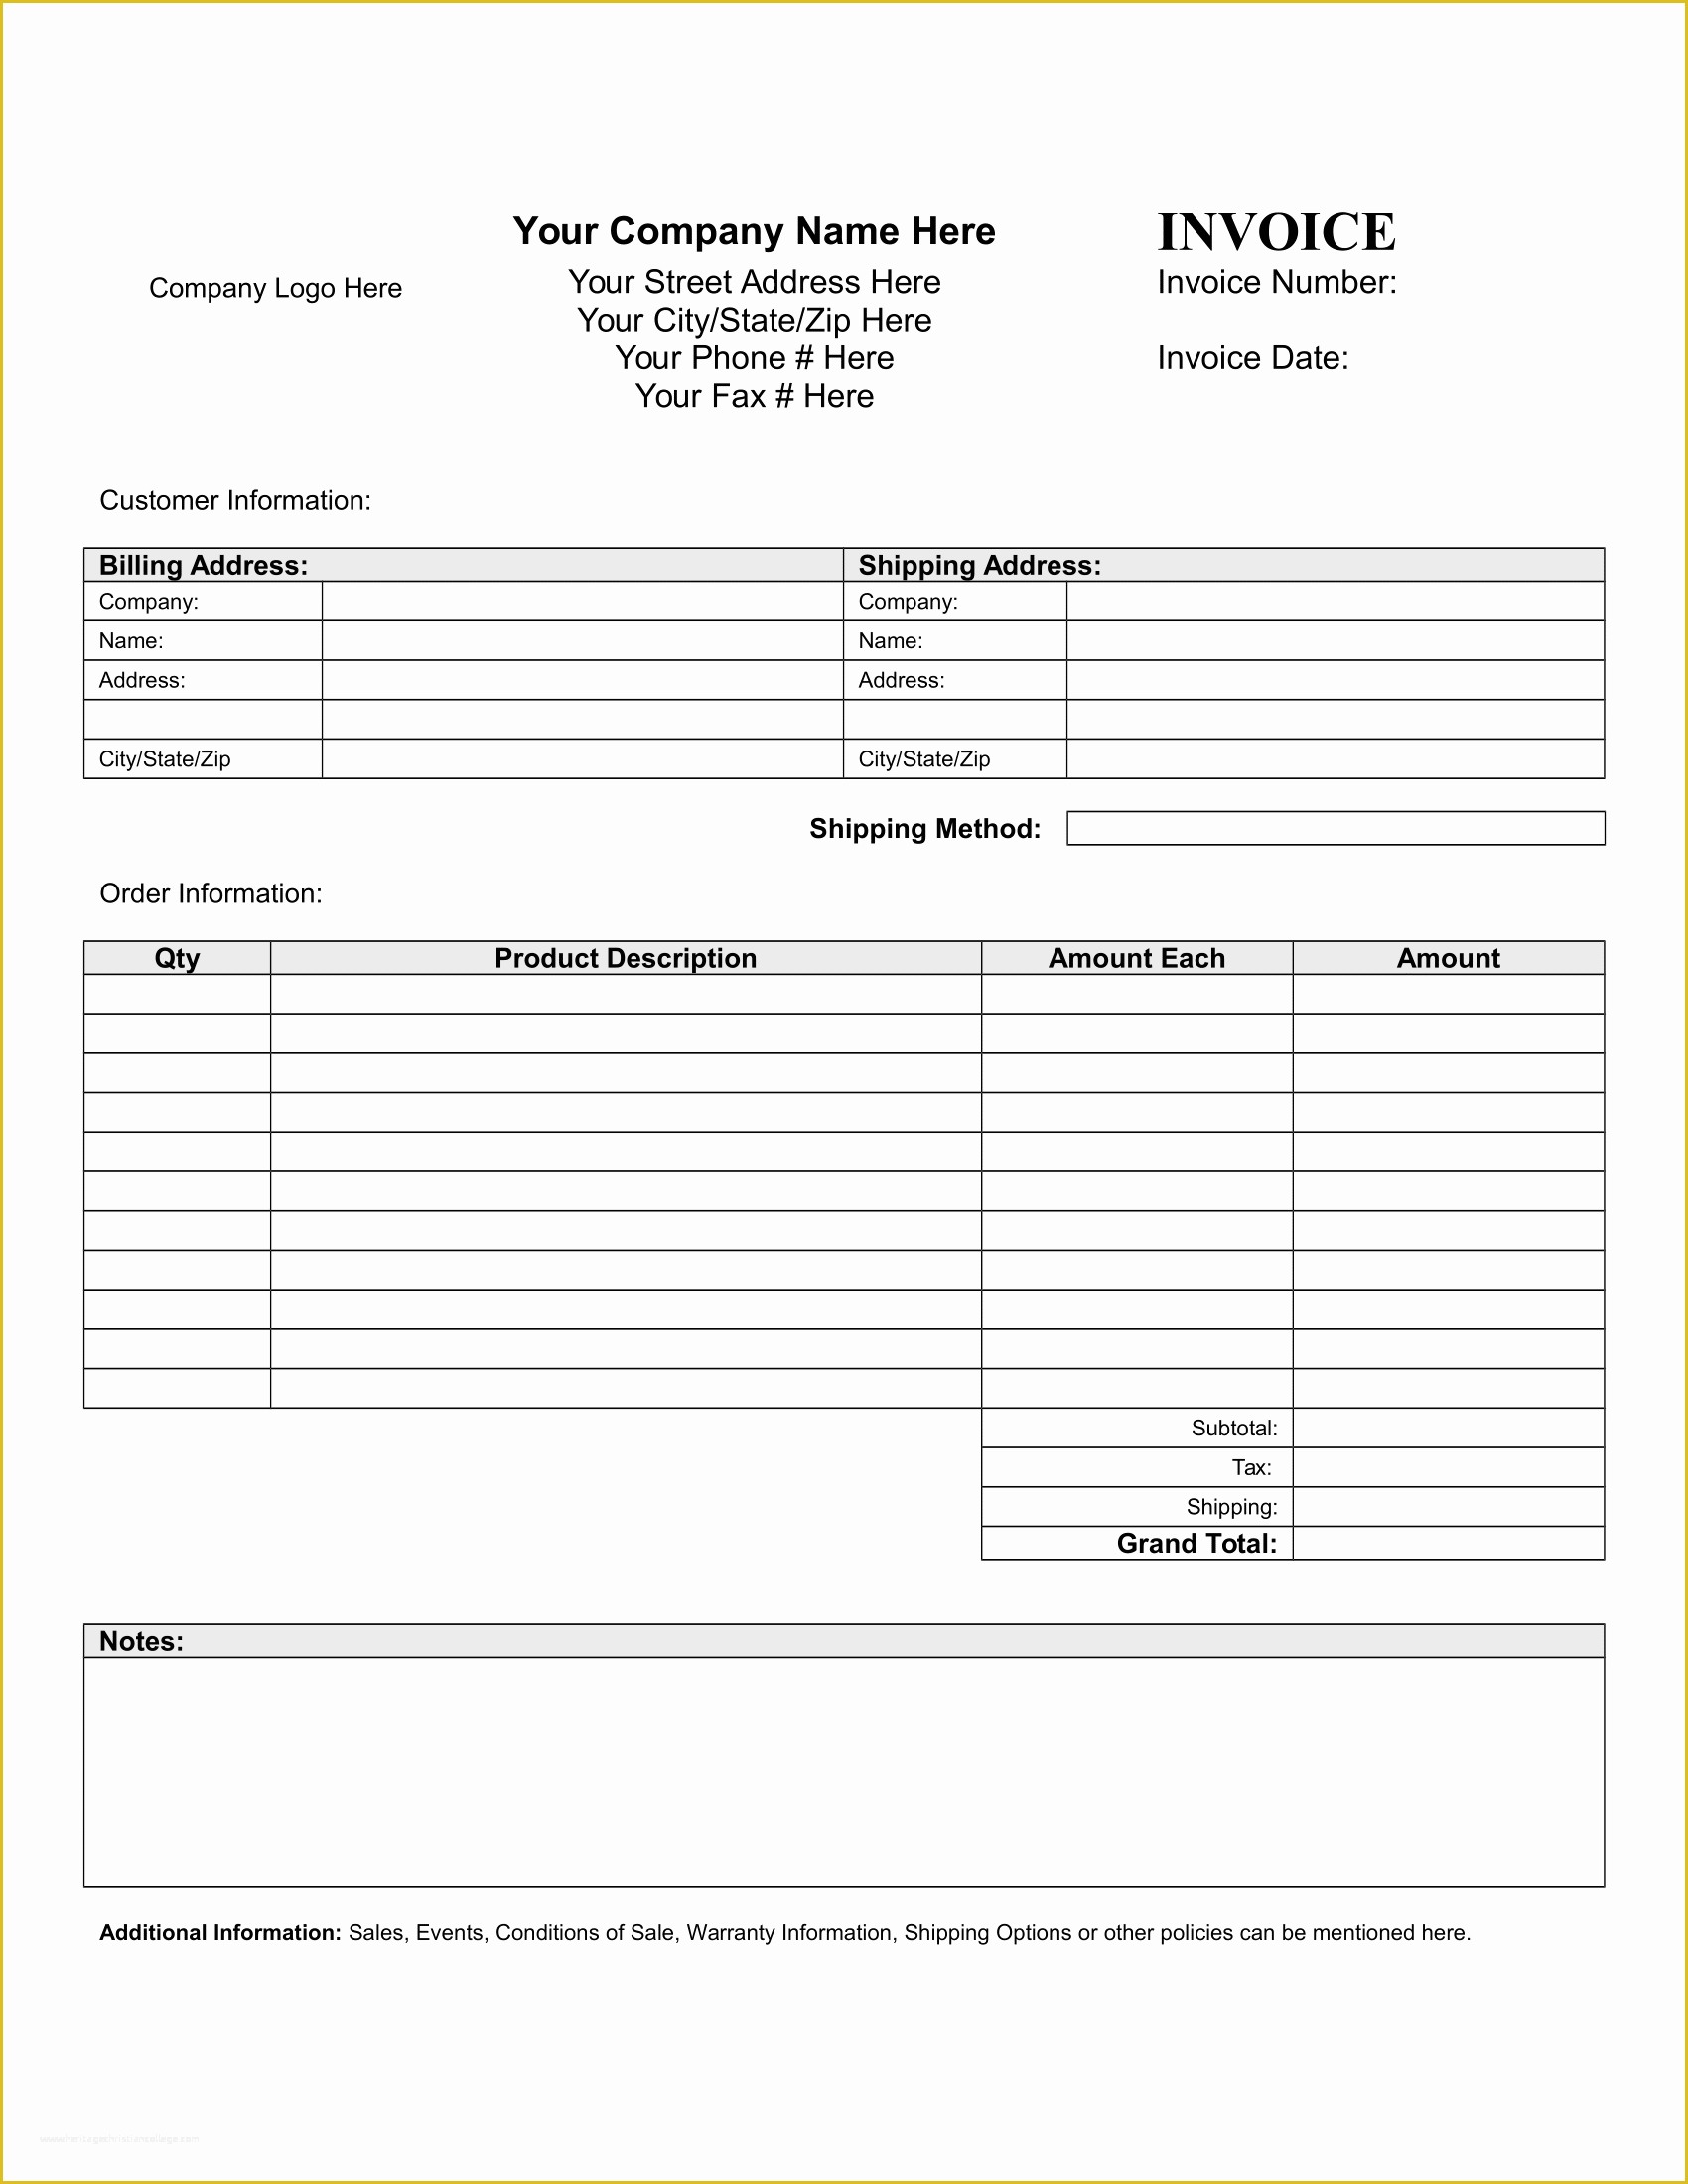 Free Invoice form Template Of forms Download Free Business Letter Templates forms